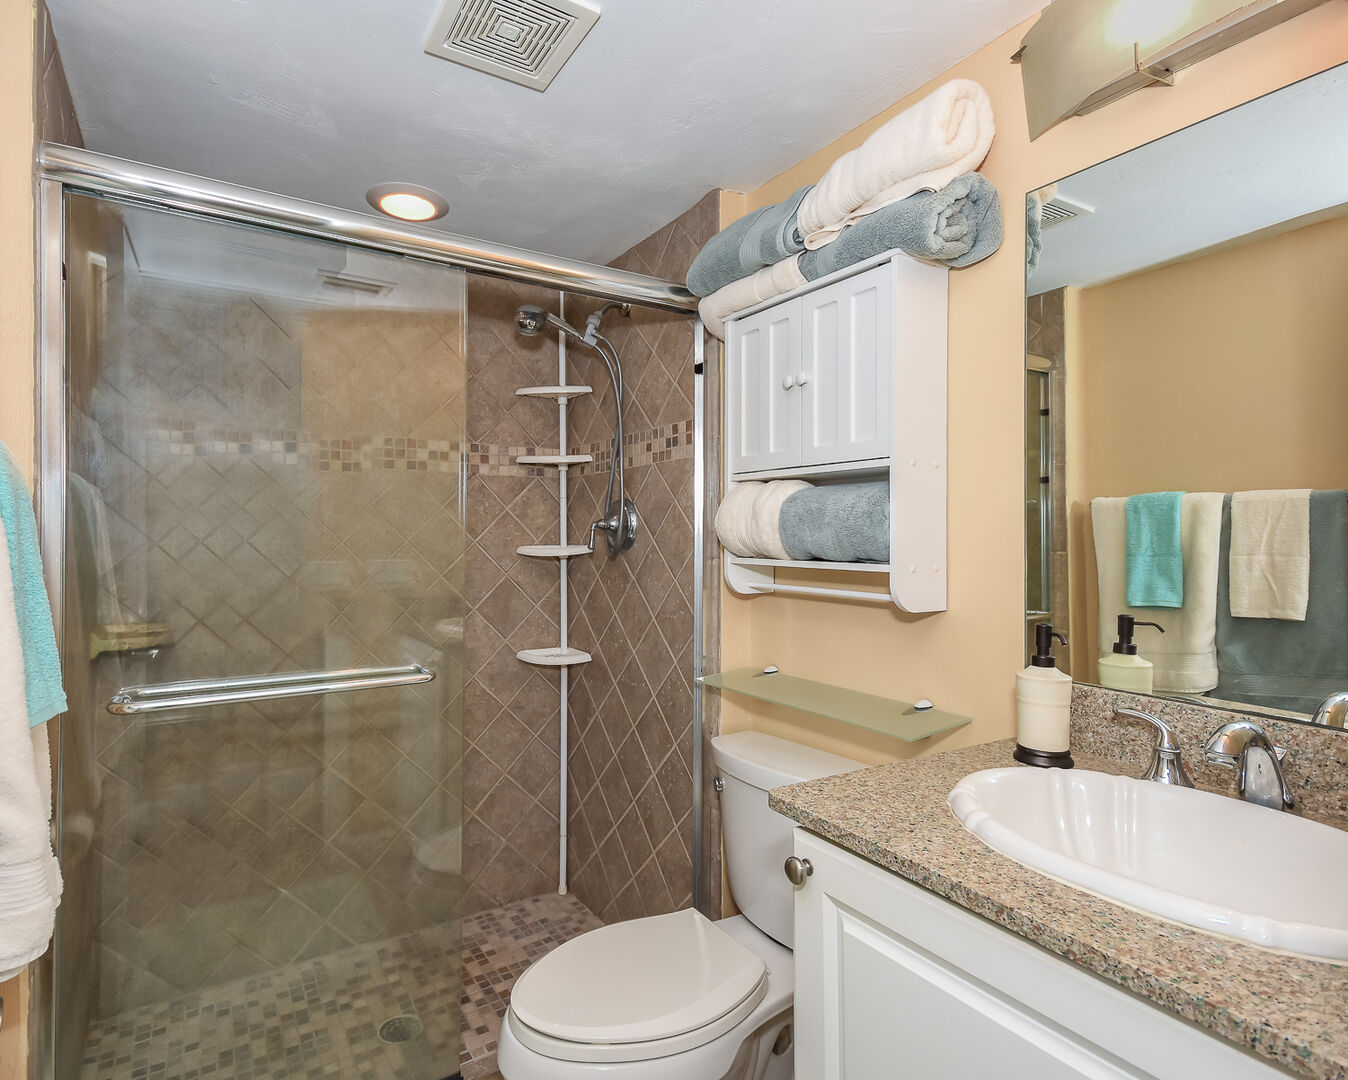 Guest bath with walk in shower.